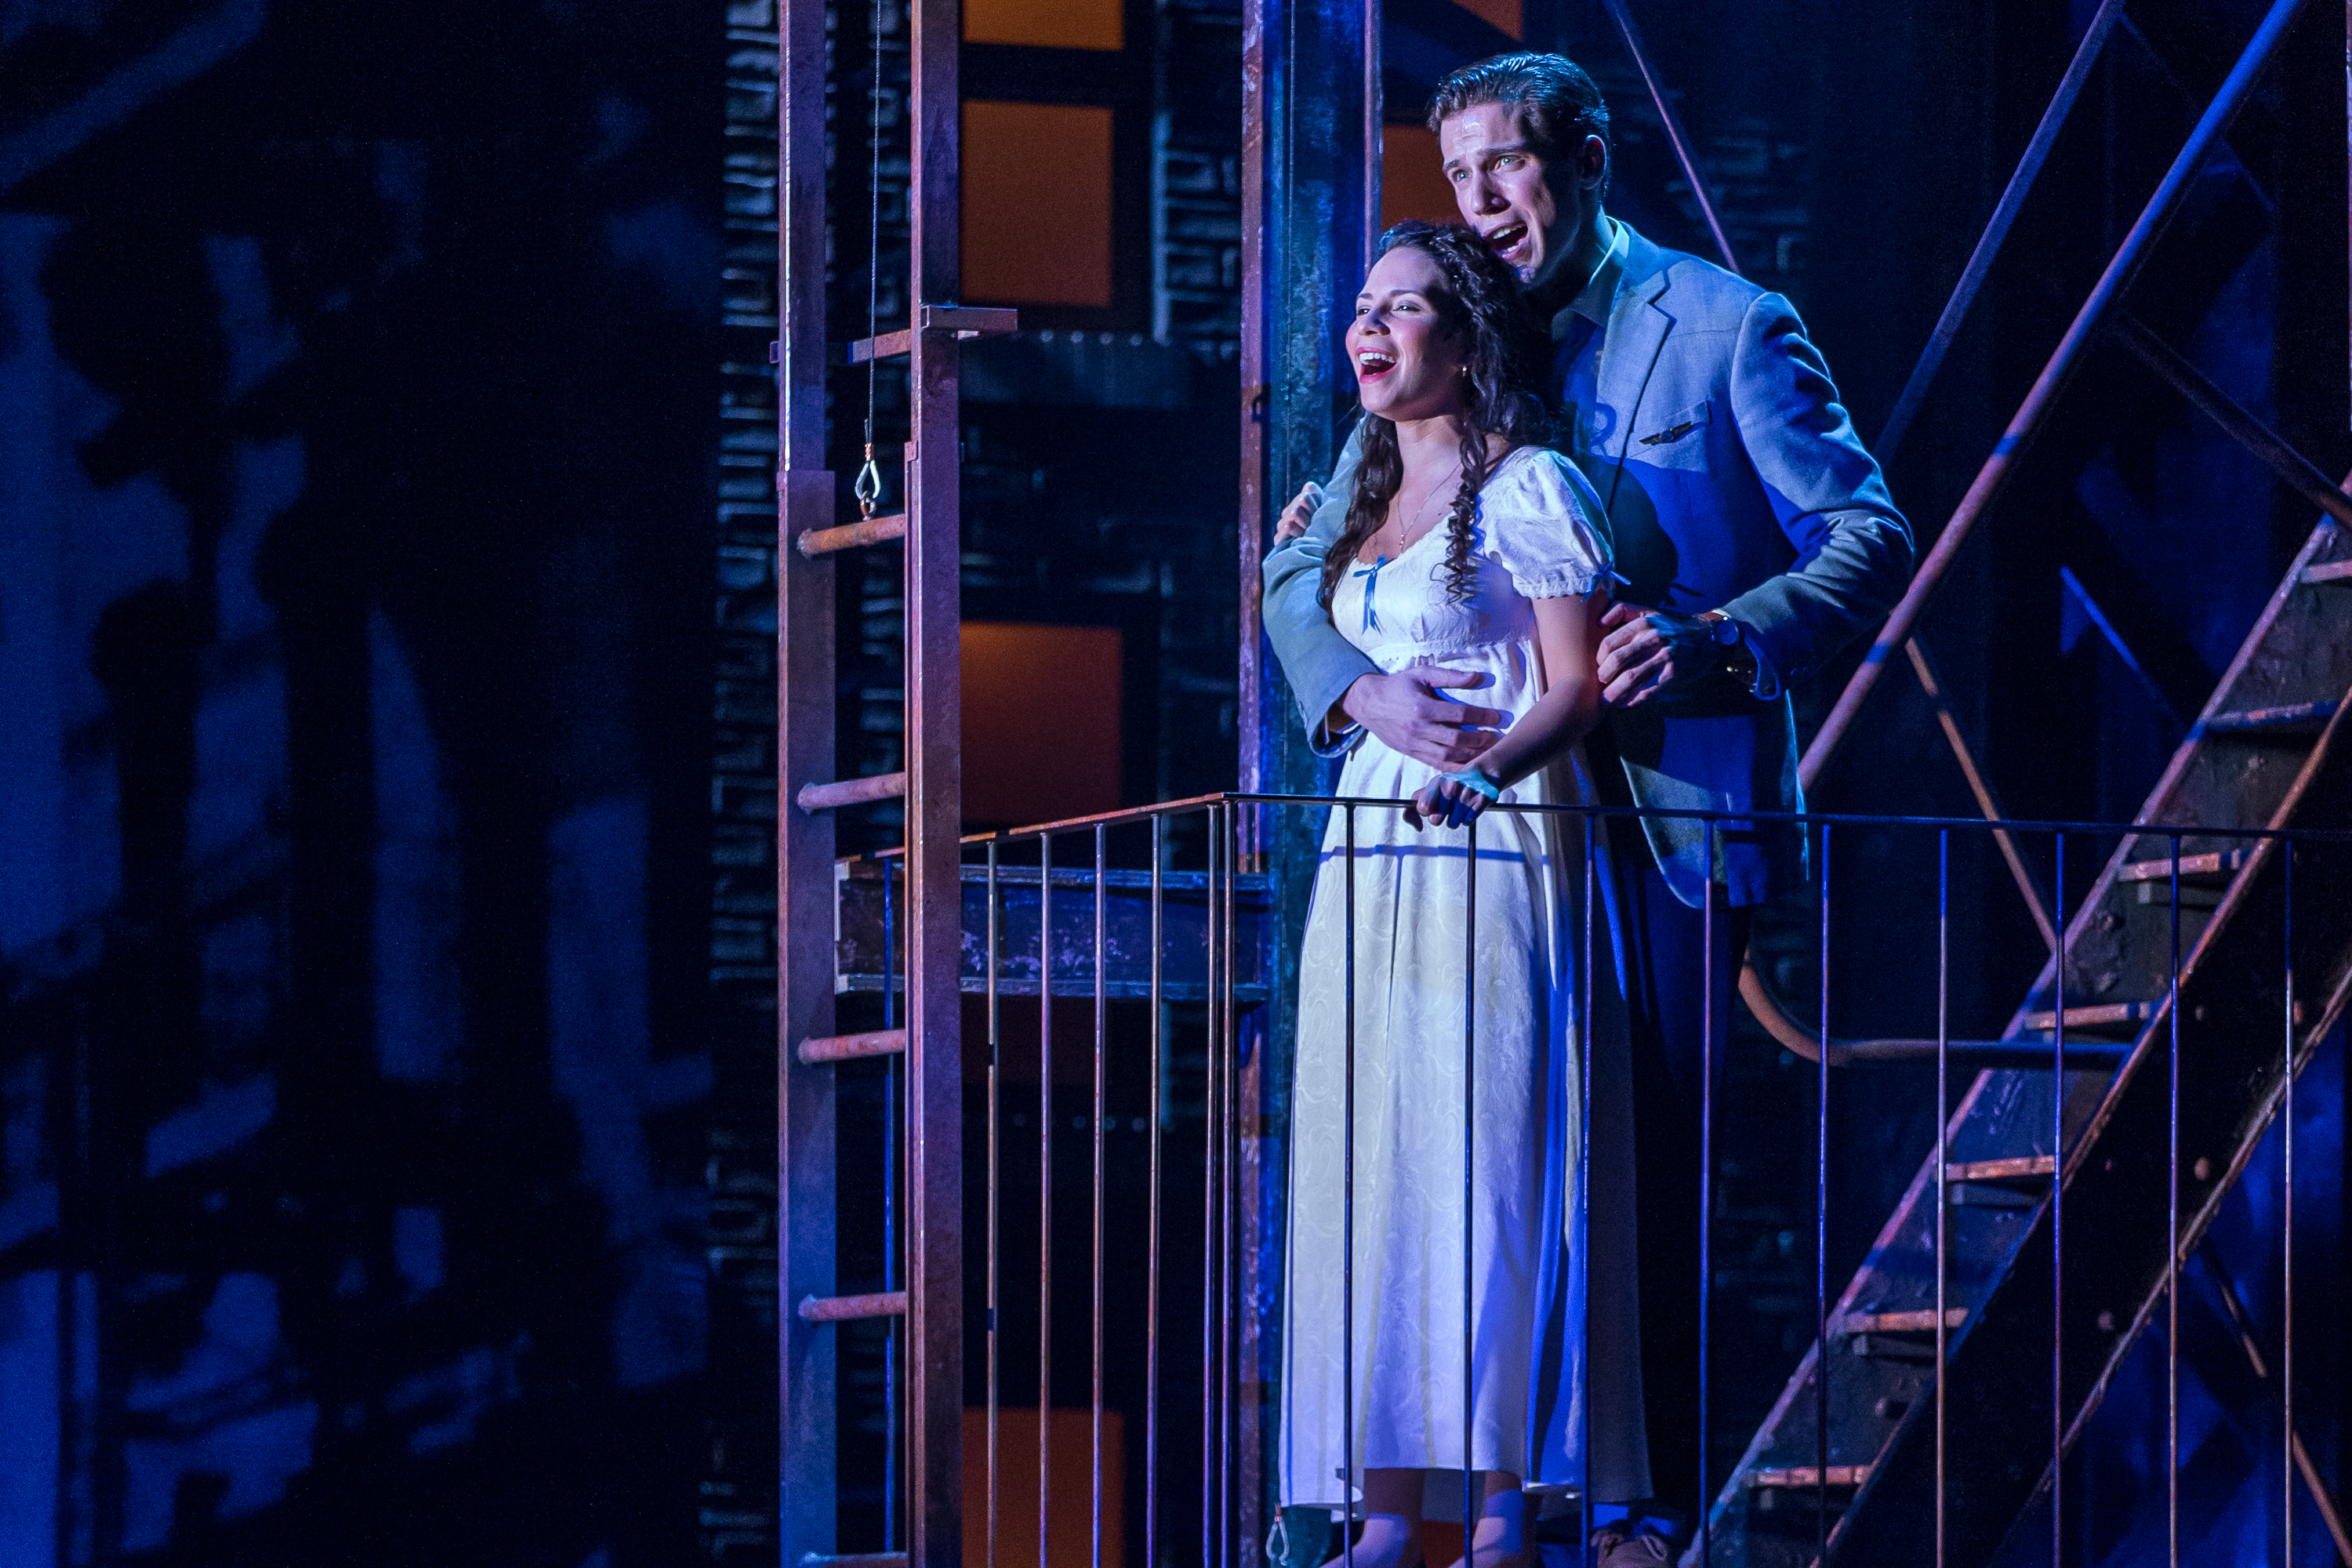 Showbiz Nation LIVE! Interview with Drury Lane's WEST SIDE STORY stars JIM DeSELM & CHRISTINA NIEVES 2 One of our favorite guests, SKLYER ADAMS discusses being back on the road in the national tour WAITRESS and how the musical is resonating with audiences across socio-economic lines. SKYLER also pays tribute to director/choreographer RACHEL ROCKWELL, whom he credits as the person who launched his career. WAITRESS will play the Cadillac Palace Theatre (151 W. Randolph) for a limited three-week engagement July 3 – 22, 2018. Visit BroadwayInChicago.com for tickets.